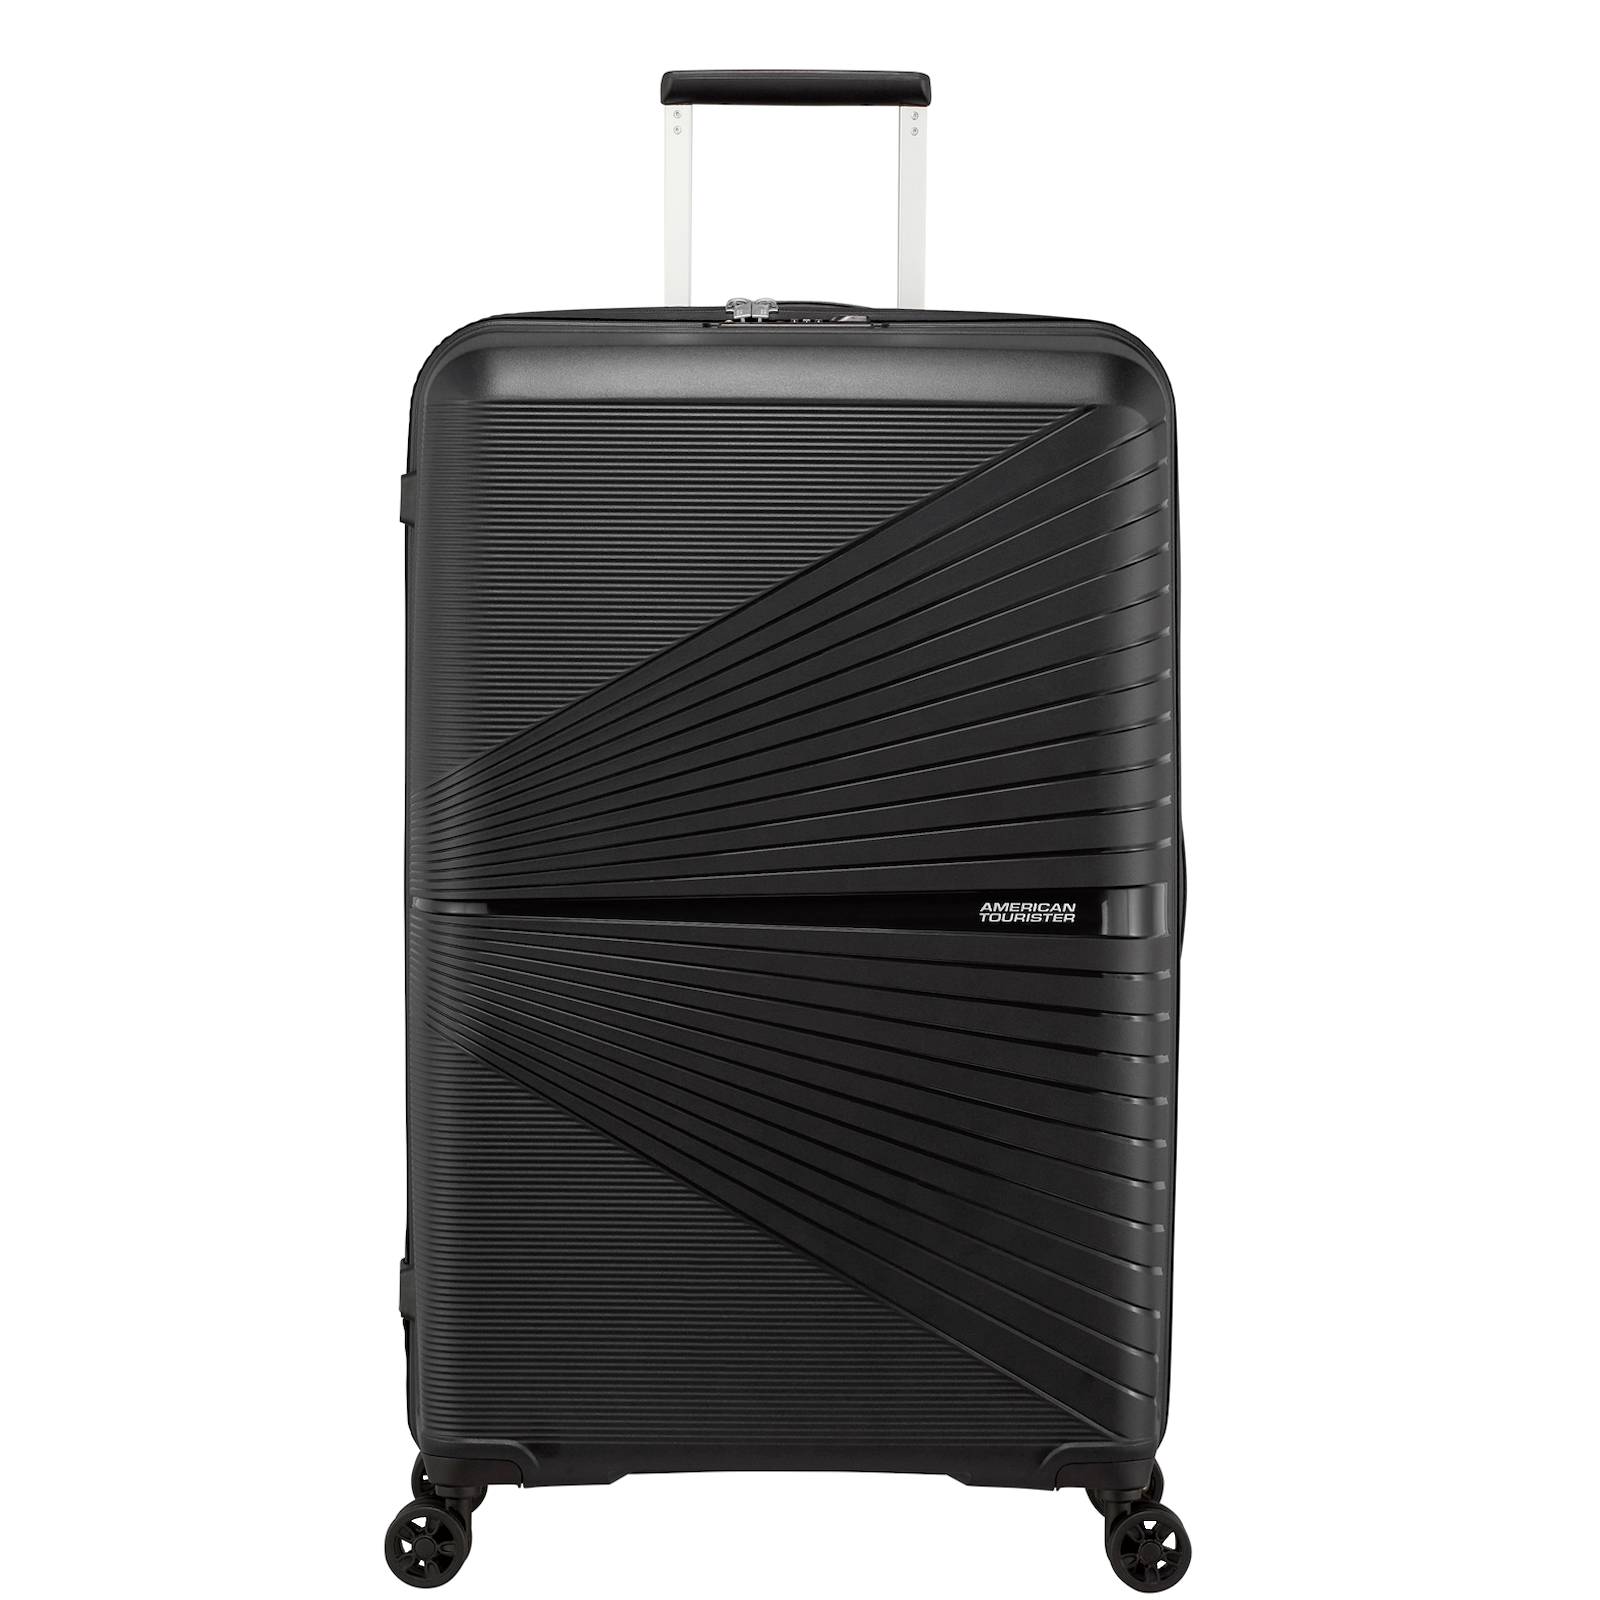 
American Tourister Airconic 77cm Large Suitcase Black